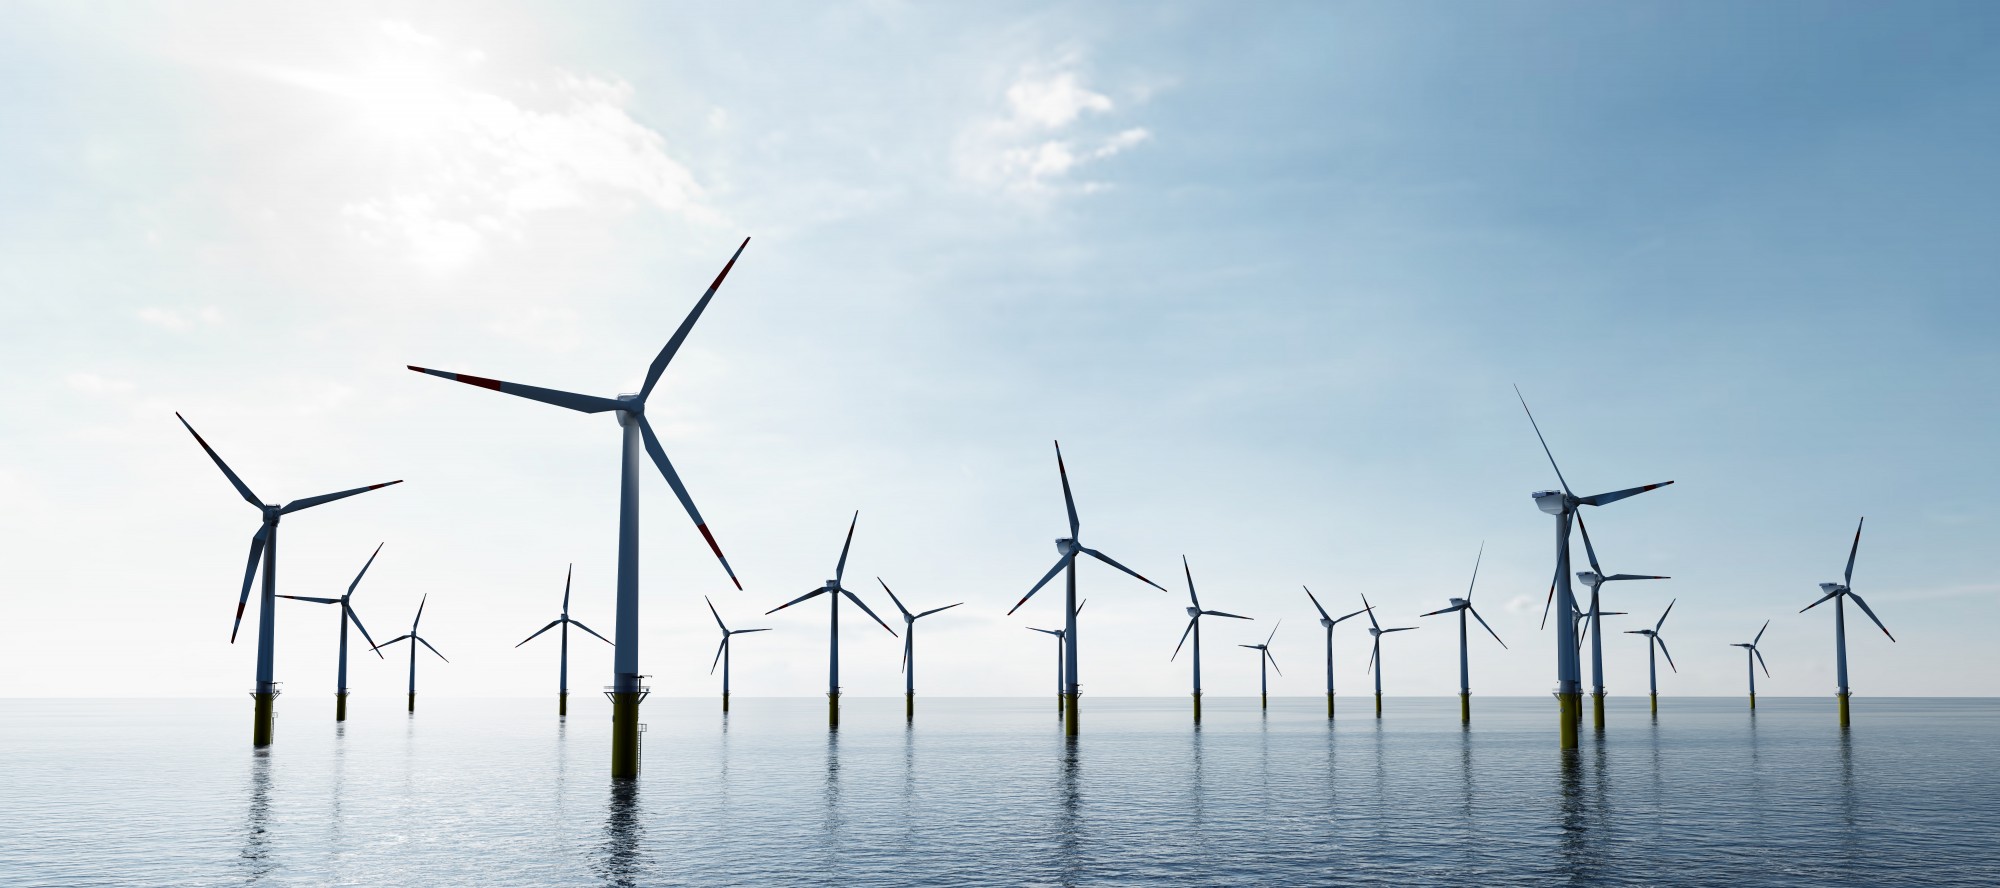 Google Signs 12-year CPPA for Wind Power in Scotland